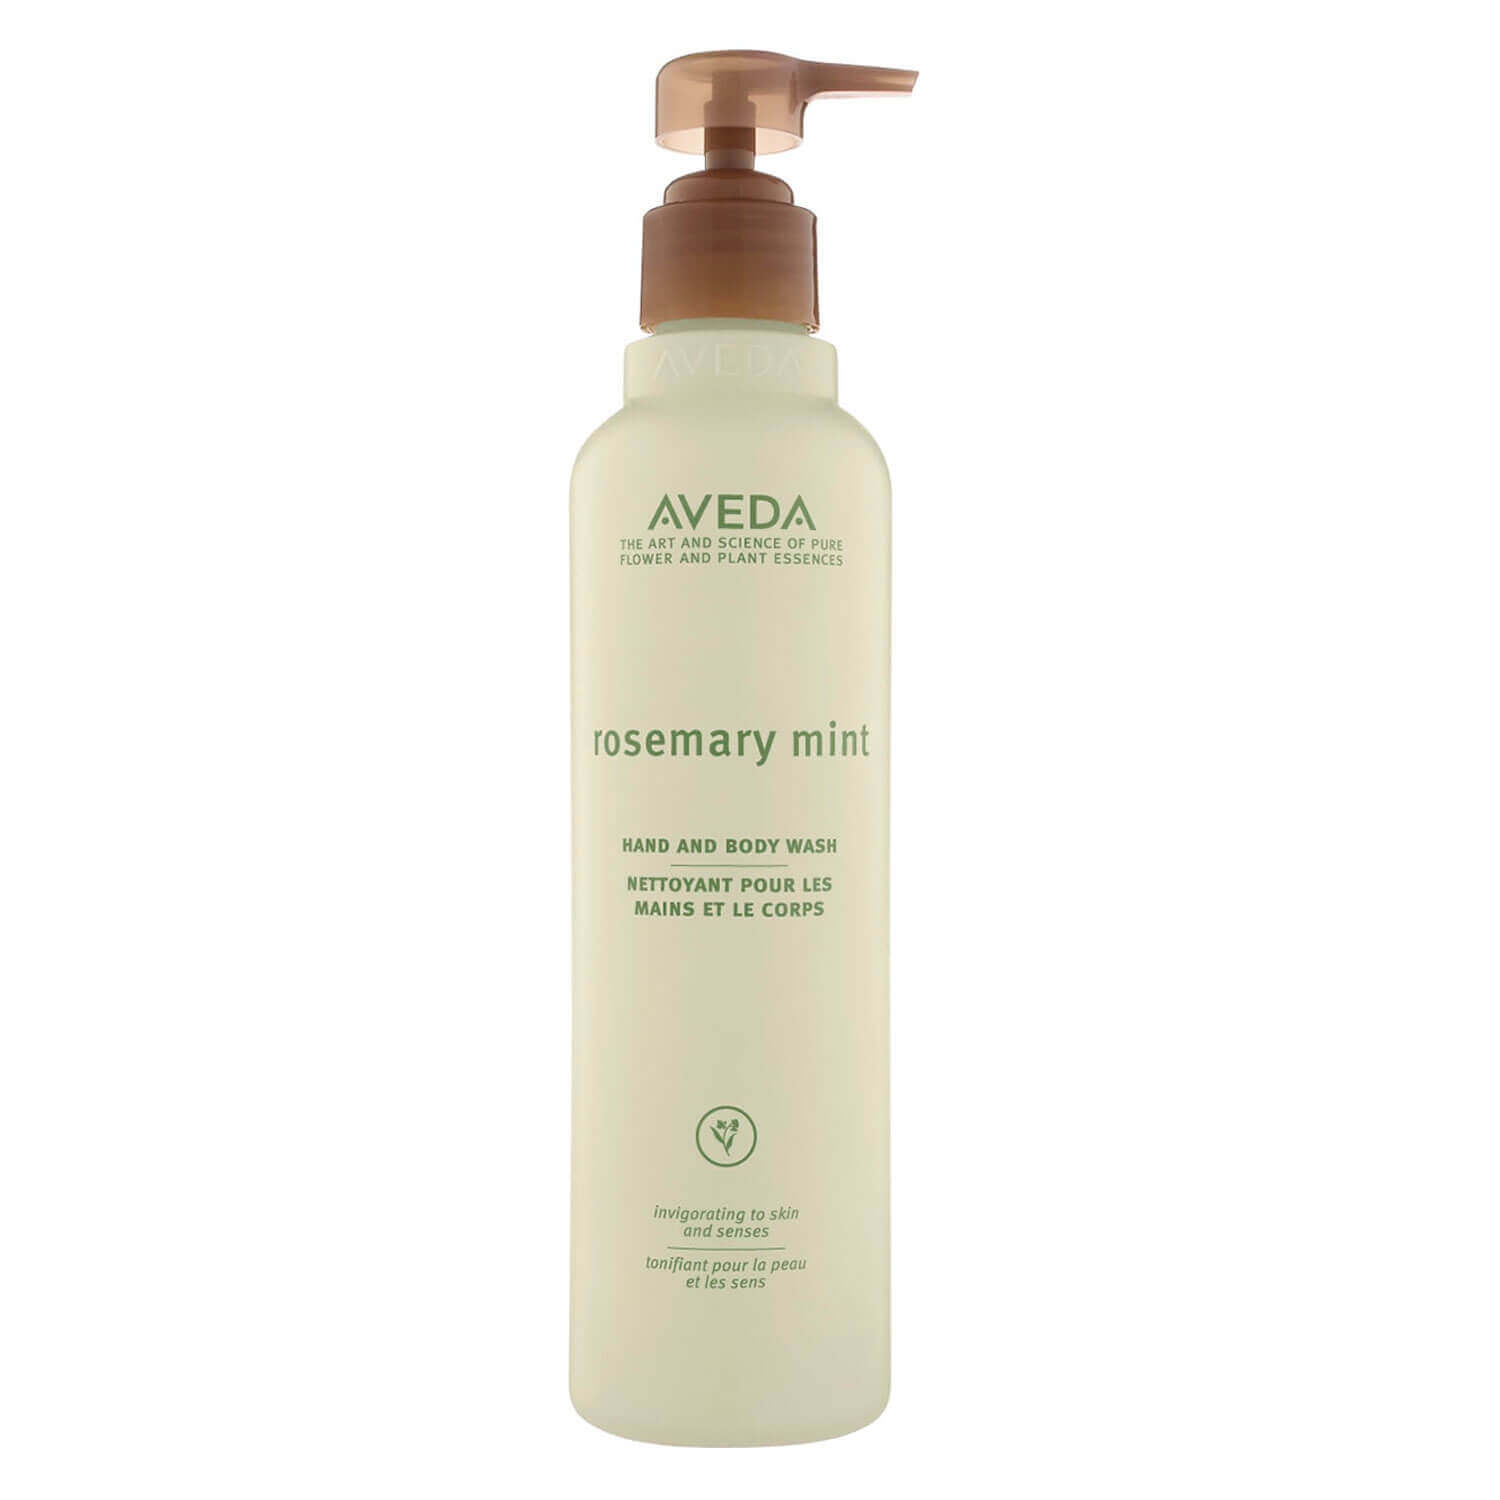 Product image from rosemary mint - hand & body wash